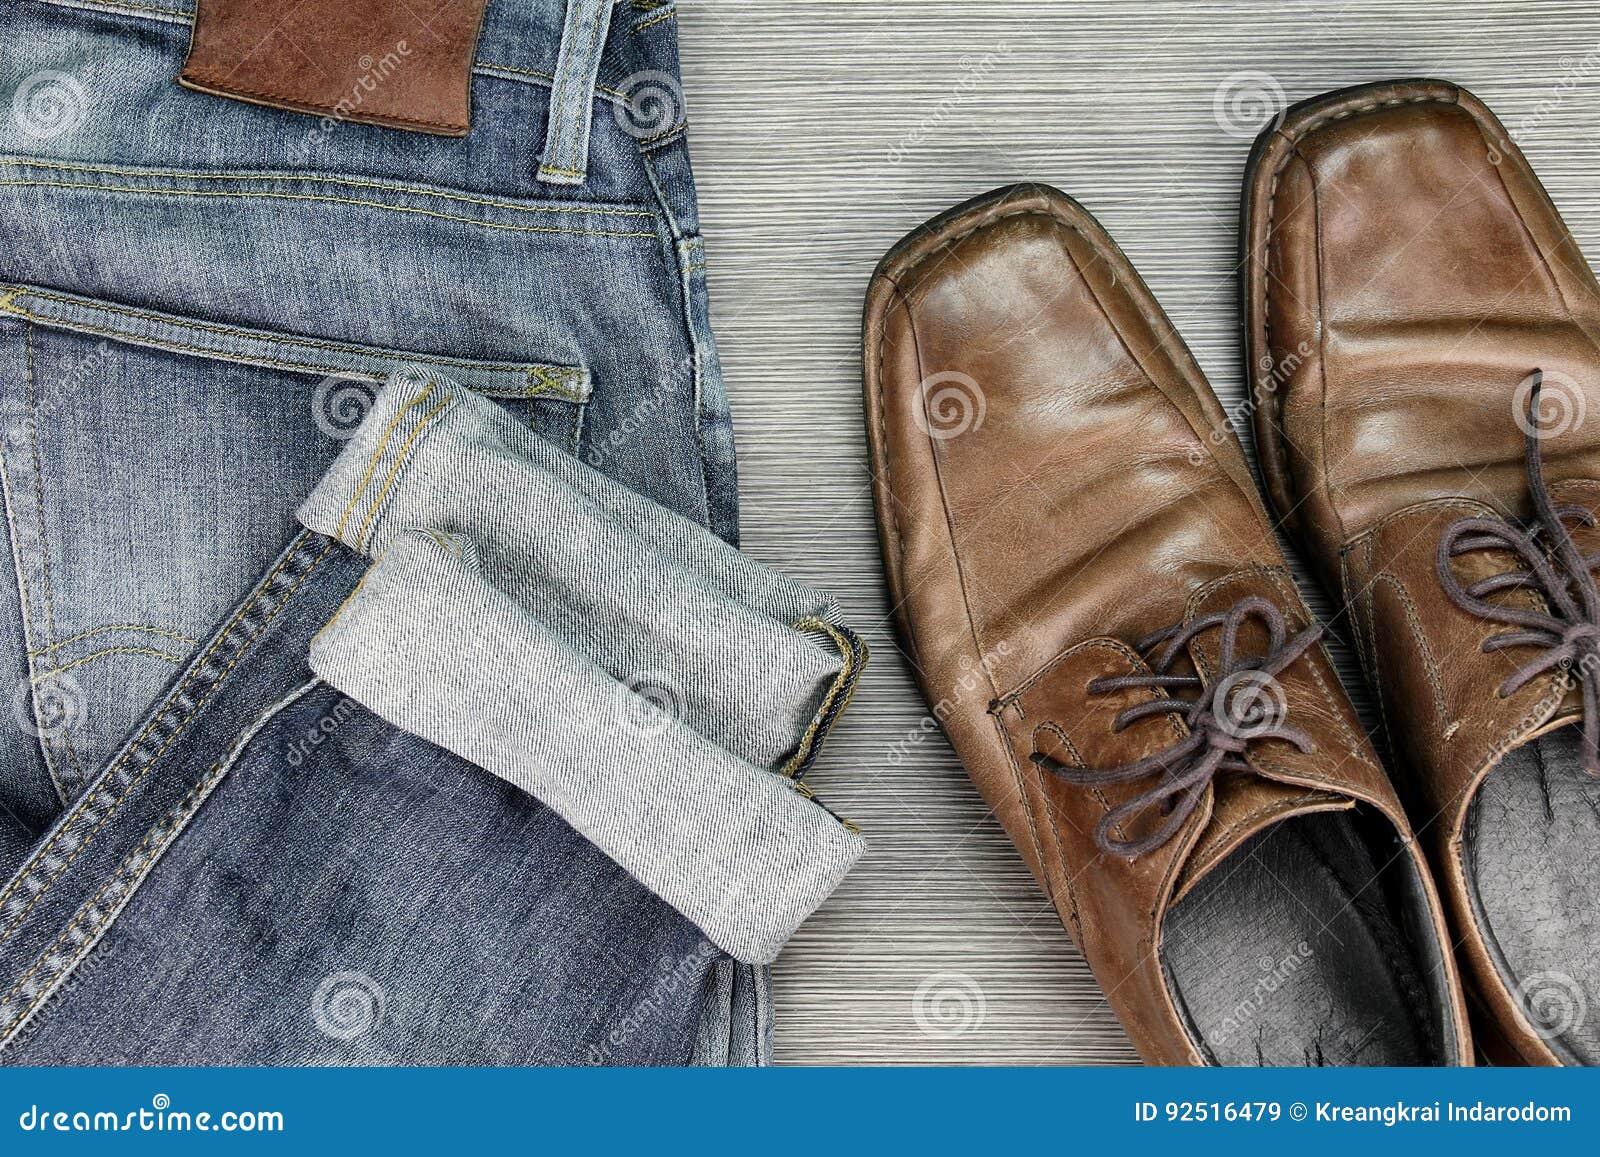 Men Fashion, Smart and Casual Outfits, Blue Jeans. Stock Image - Image ...